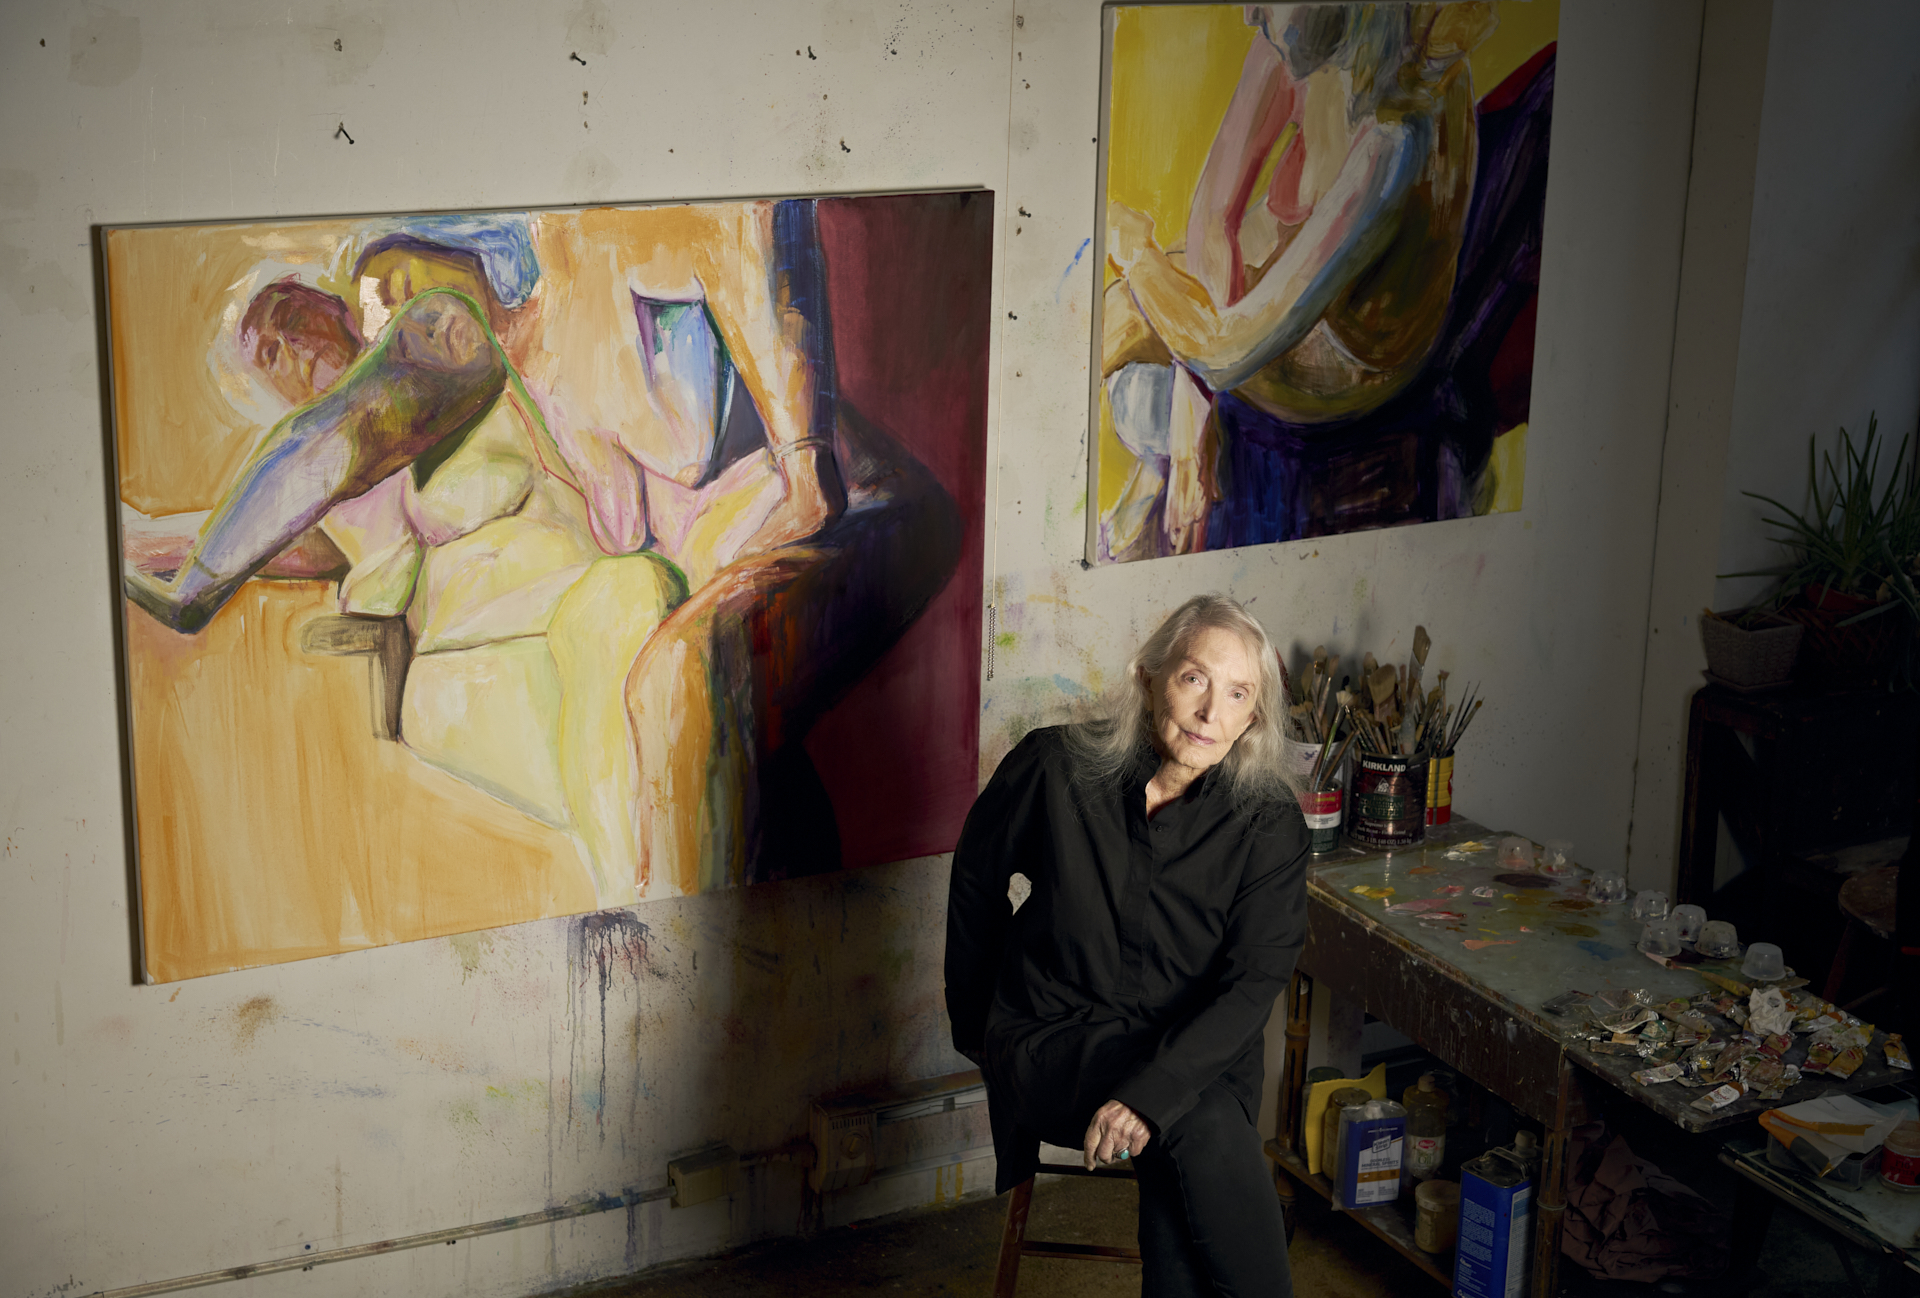 A 91 year old white woman with silver hair and blue eyes sits in front of two colorful, expressive figurative paintings. Next to her, tubes of paints and brushes fill a small table.